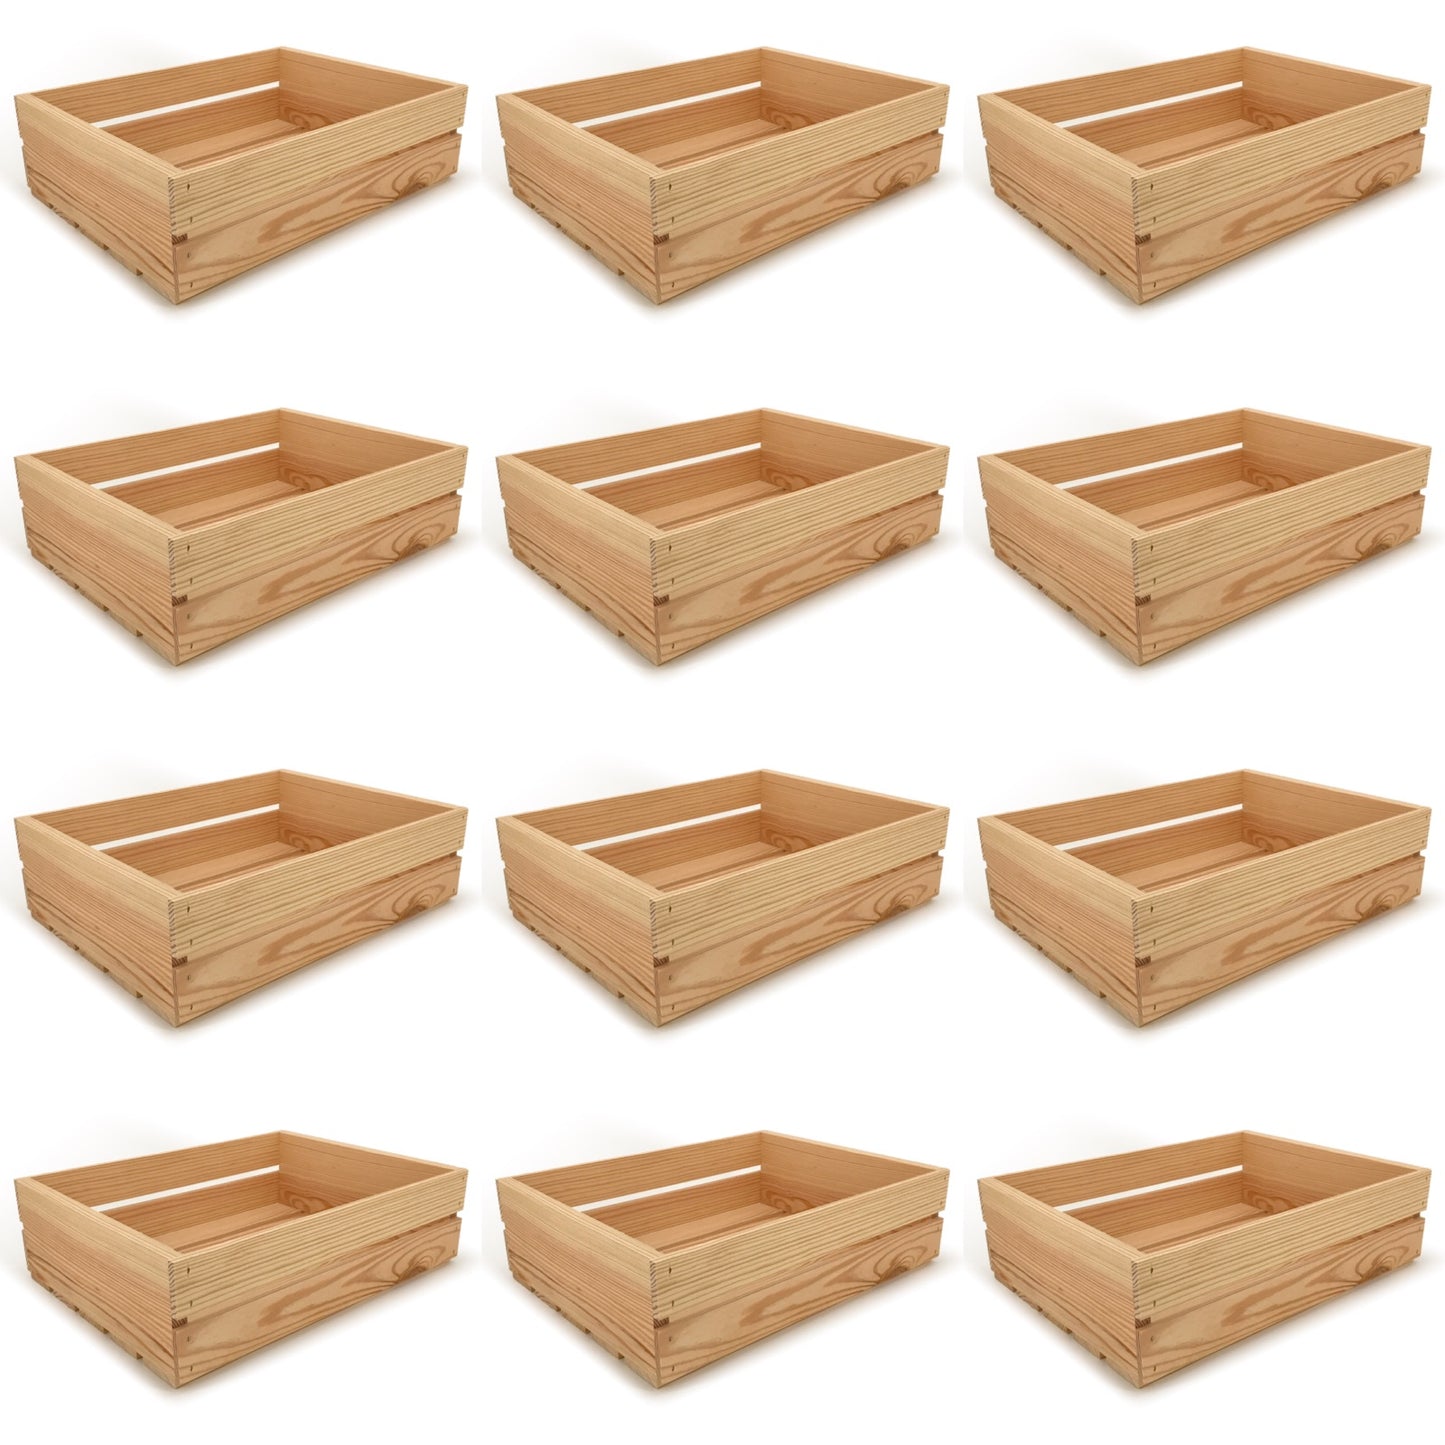 12 Small wooden crates 18x14x5.25, 6-WS-18-14-5.25-NX-NW-NL, 12-WS-18-14-5.25-NX-NW-NL, 24-WS-18-14-5.25-NX-NW-NL, 48-WS-18-14-5.25-NX-NW-NL, 96-WS-18-14-5.25-NX-NW-NL